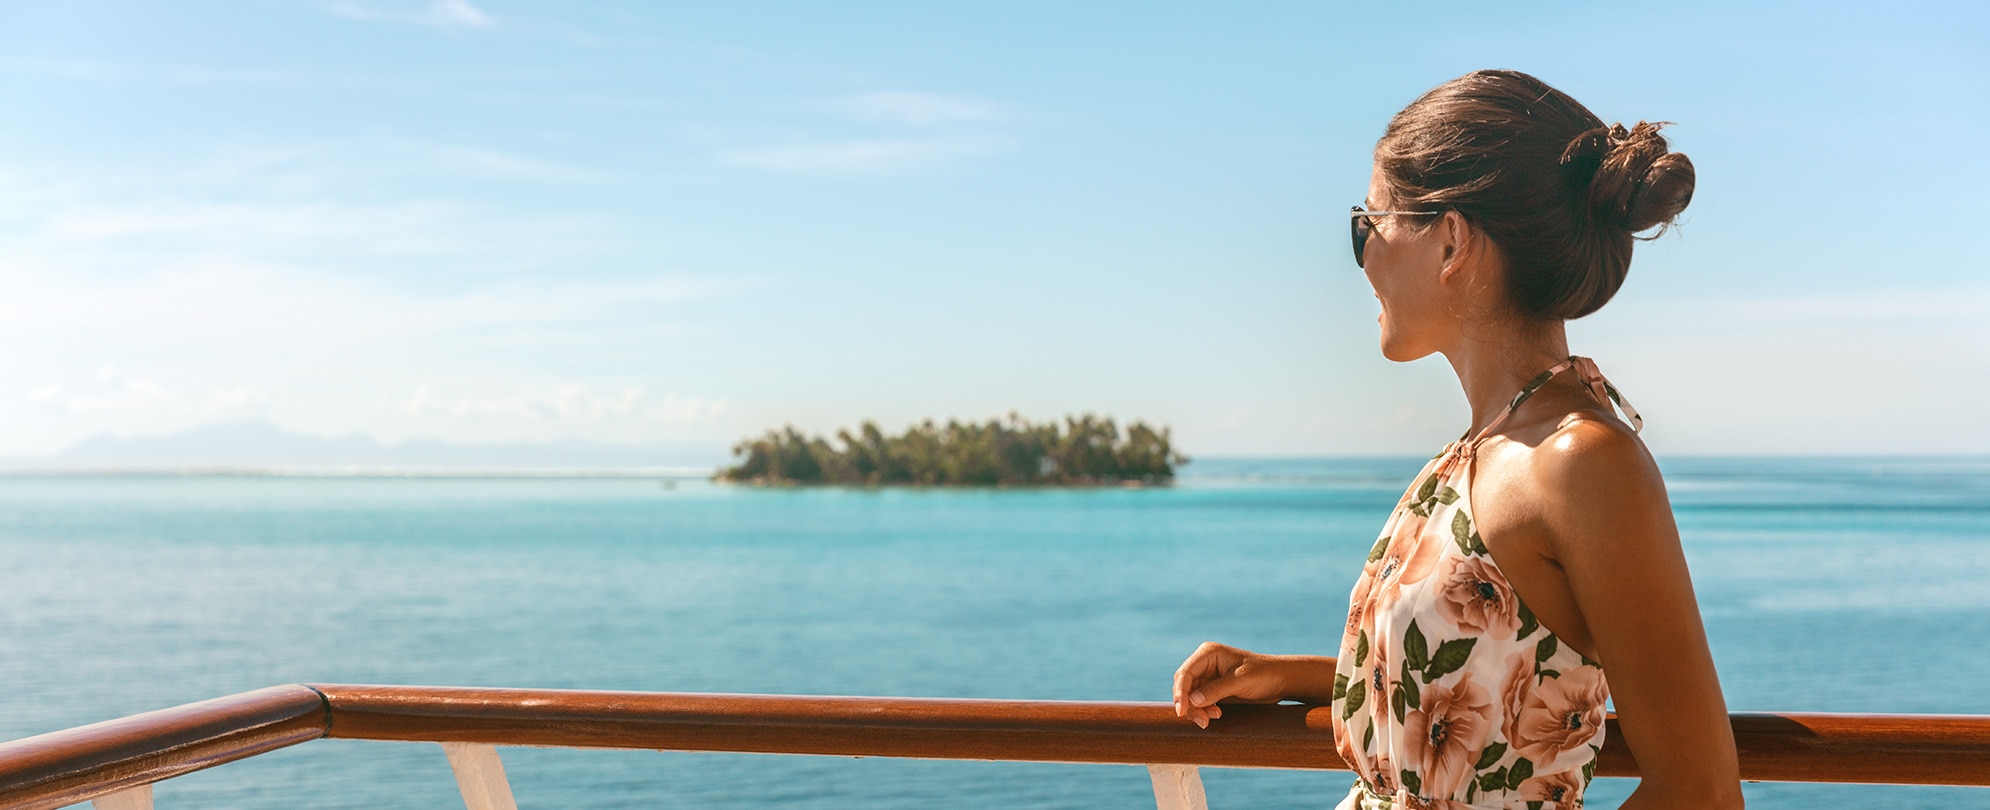 Cruise ship travel vacation luxury tourism woman looking at ocean from deck of sailing boat. Luxury Tahiti Bora Bora French Polynesia destination summer lifestyle.